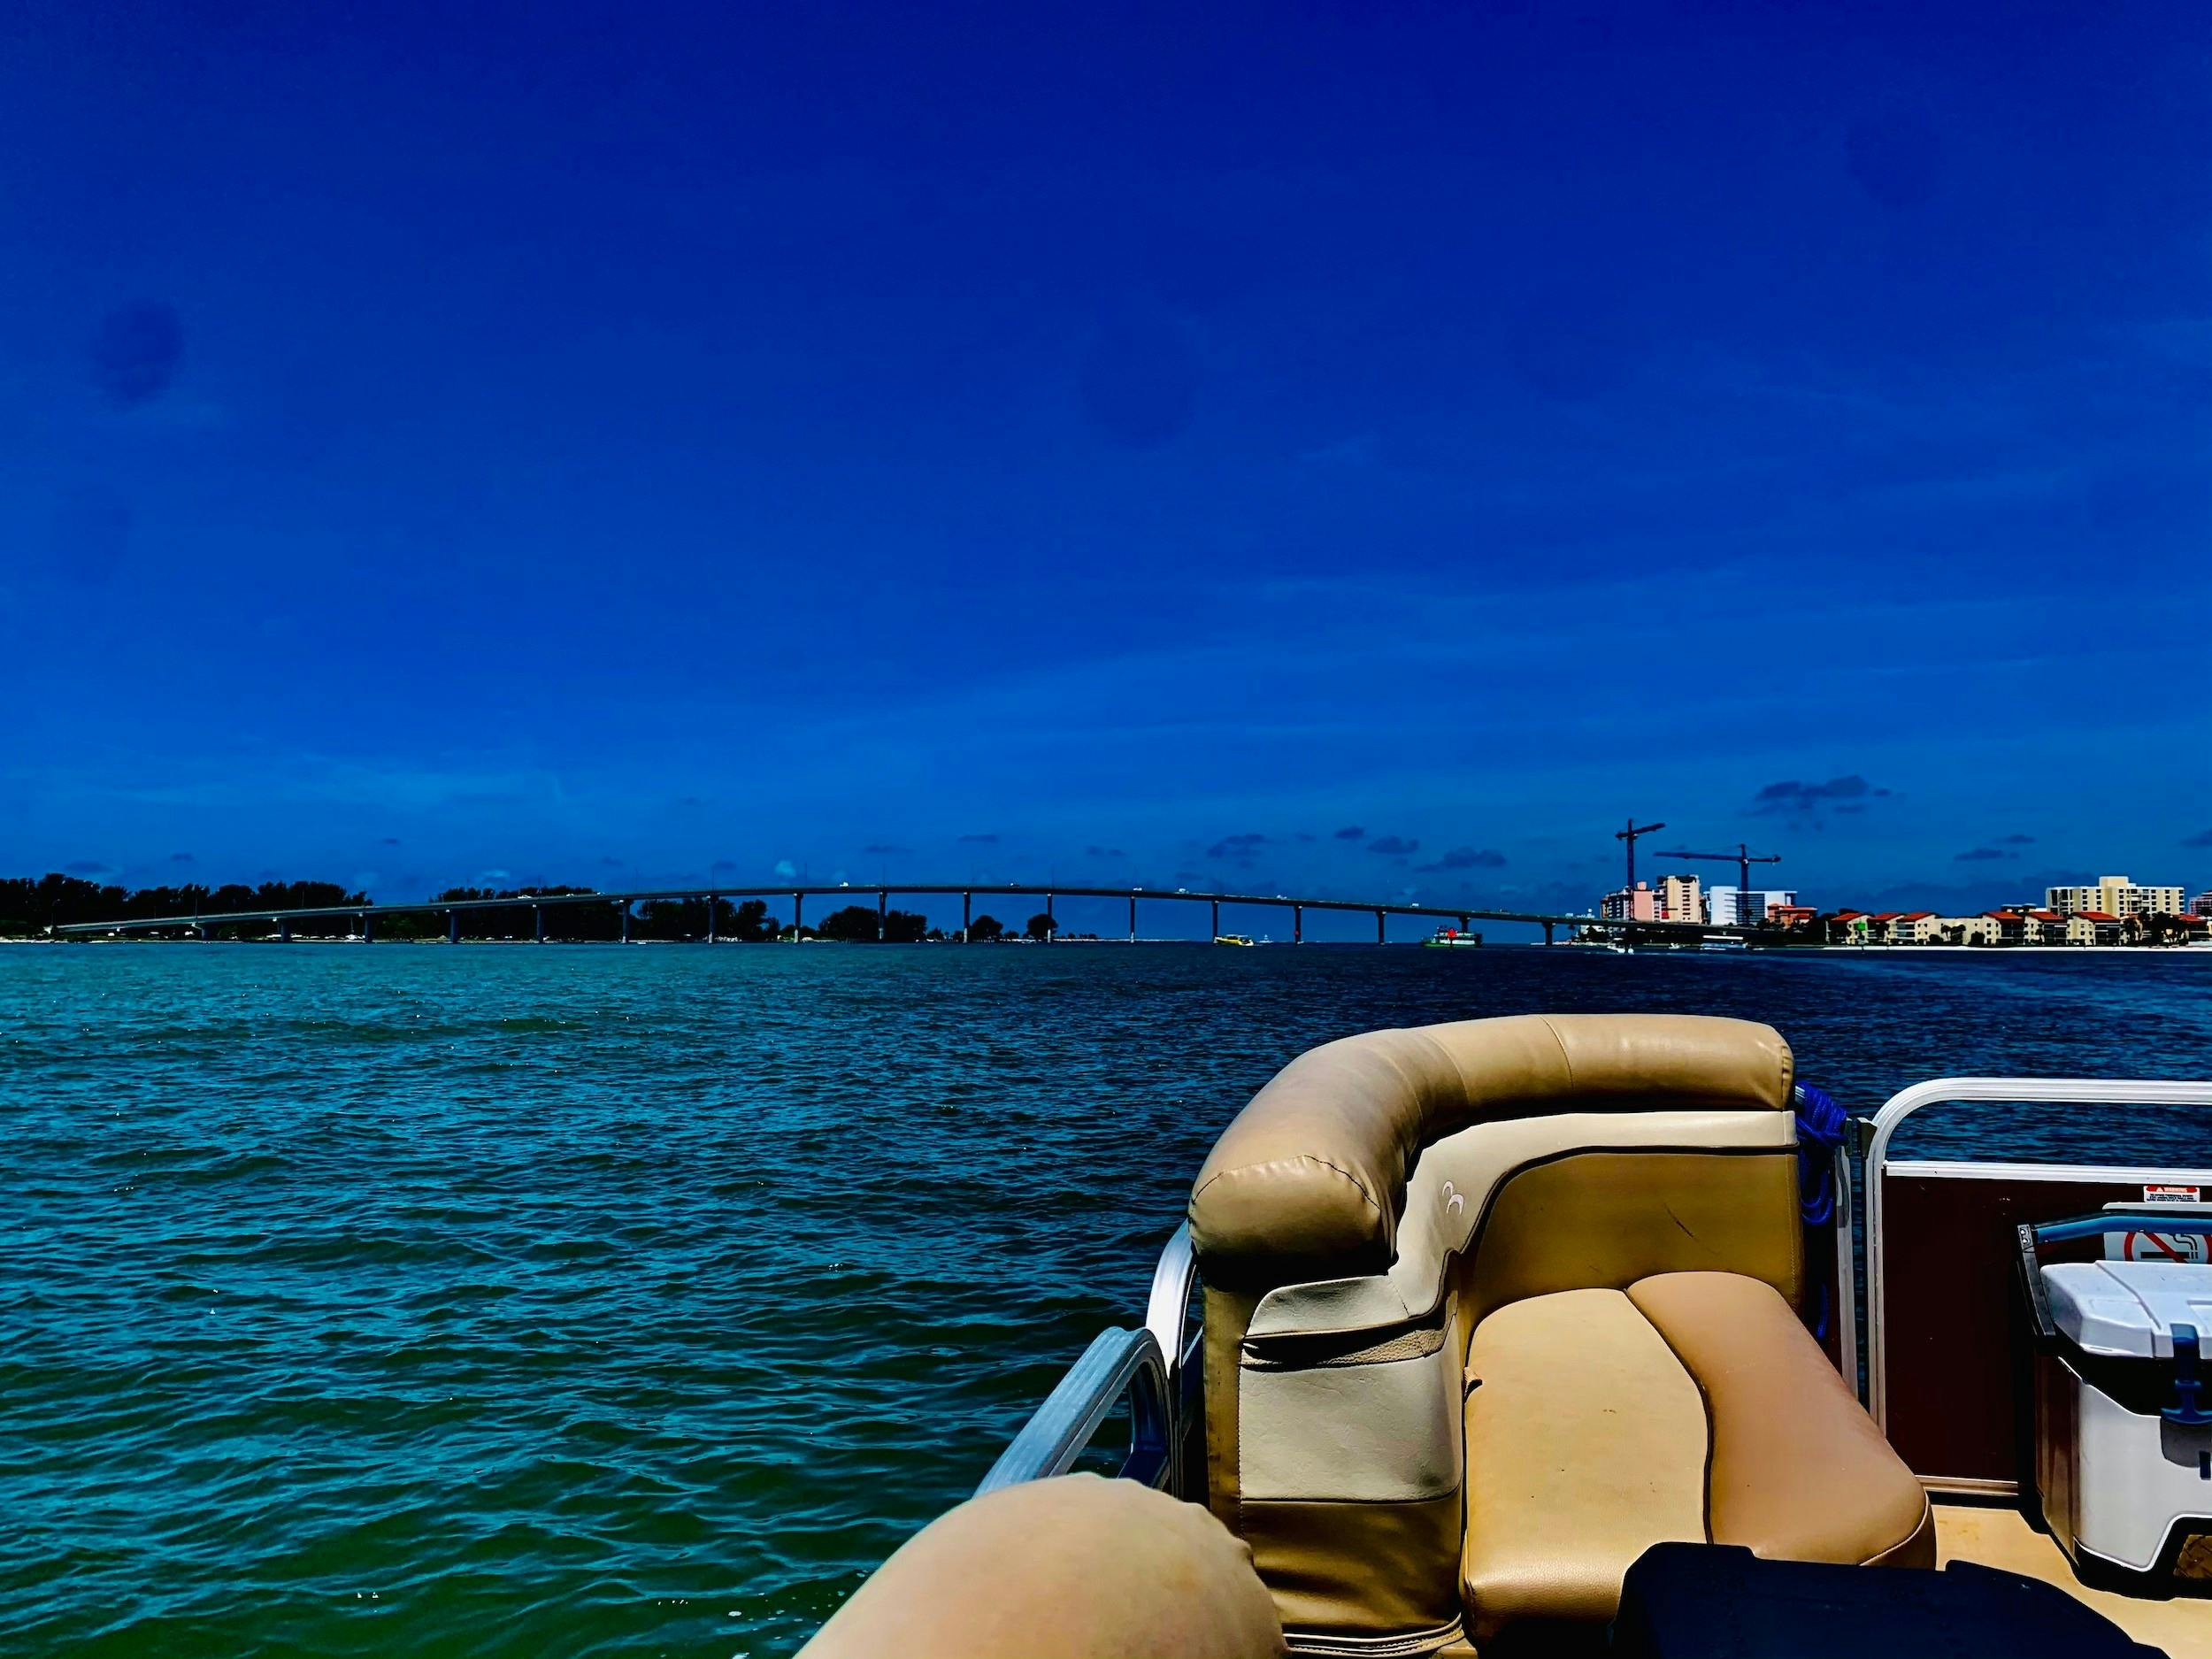 fareharbor-lagerheadcycleboats__clearwater|299886-707116